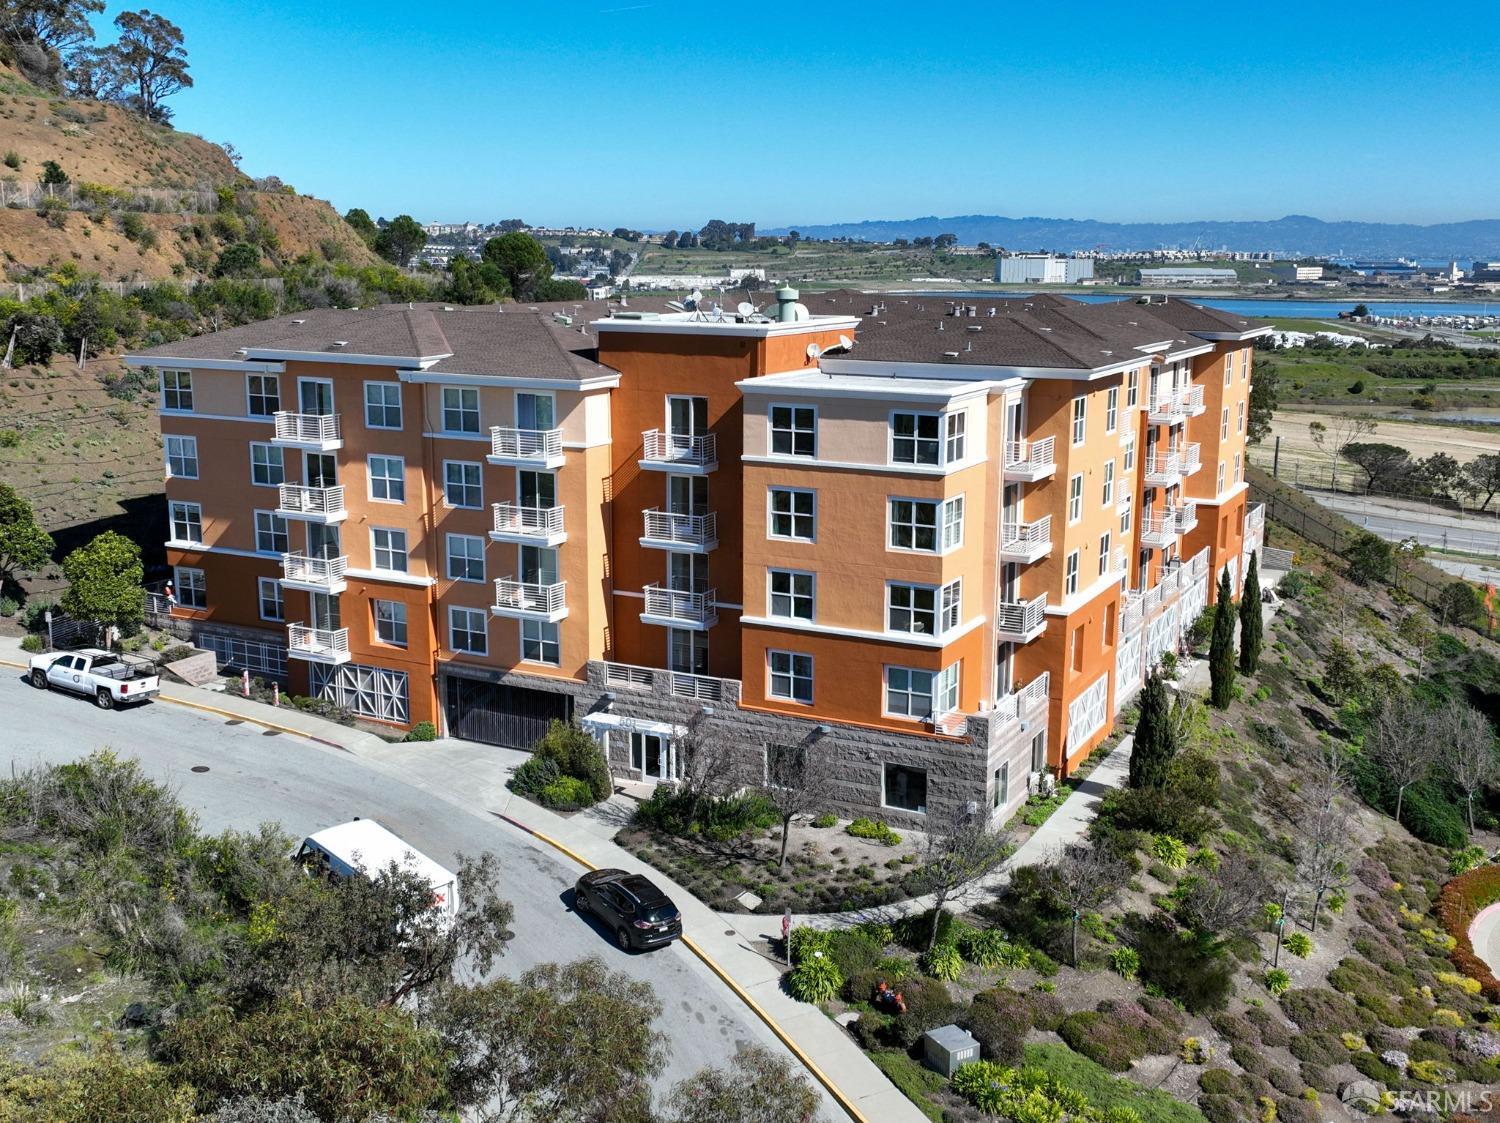 Photo of 501 Crescent Wy #5213 in San Francisco, CA